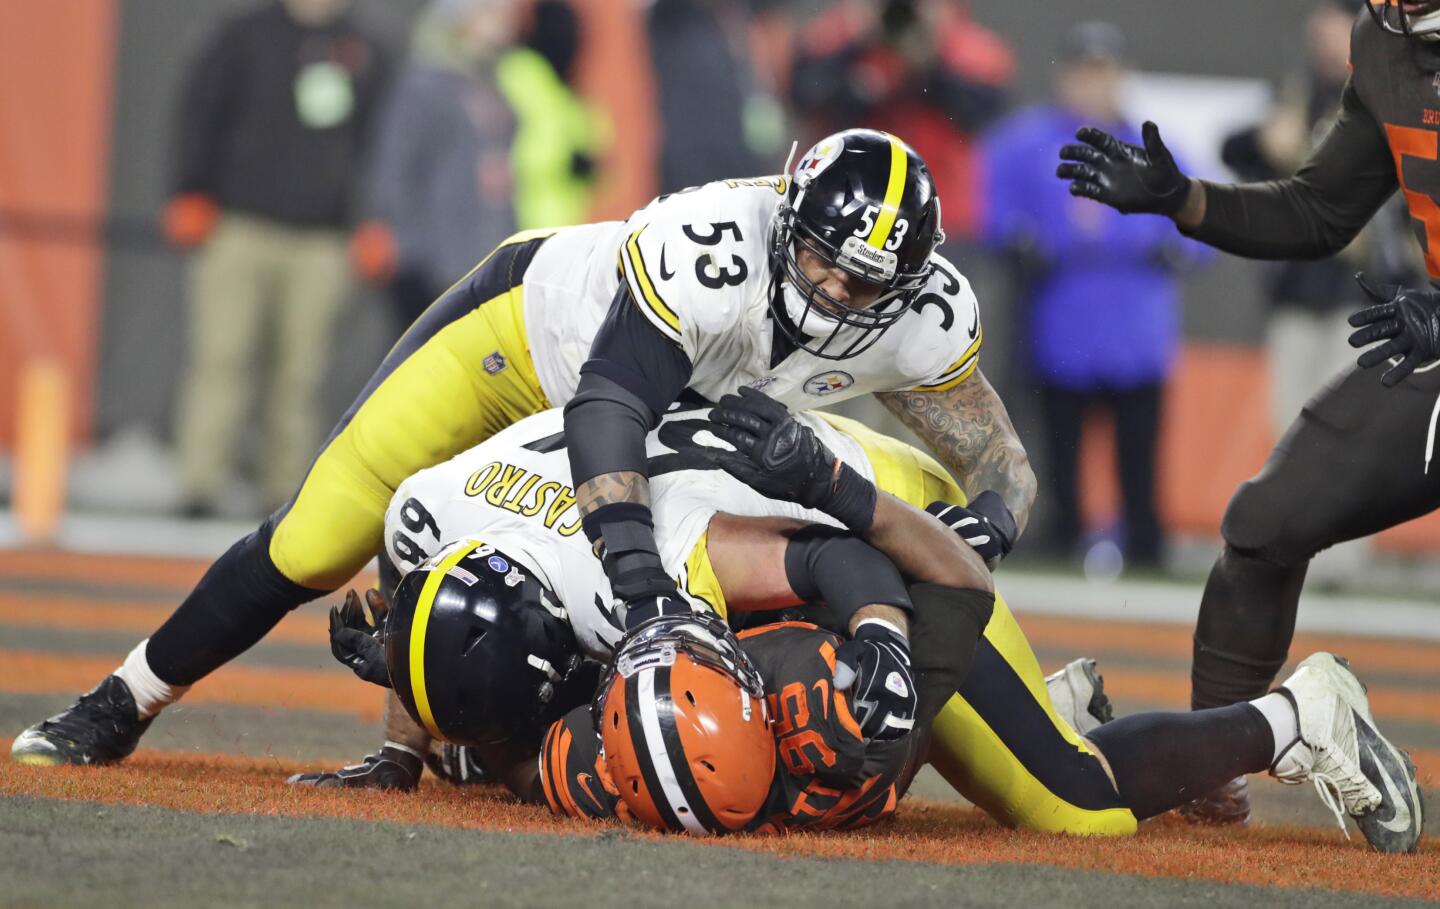 Browns defensive end Myles Garrett (95) is punched by Steelers center Maurkice Pouncey (53) and tackled by offensive guard David DeCastro (66) during a brawl in a game Nov. 14.